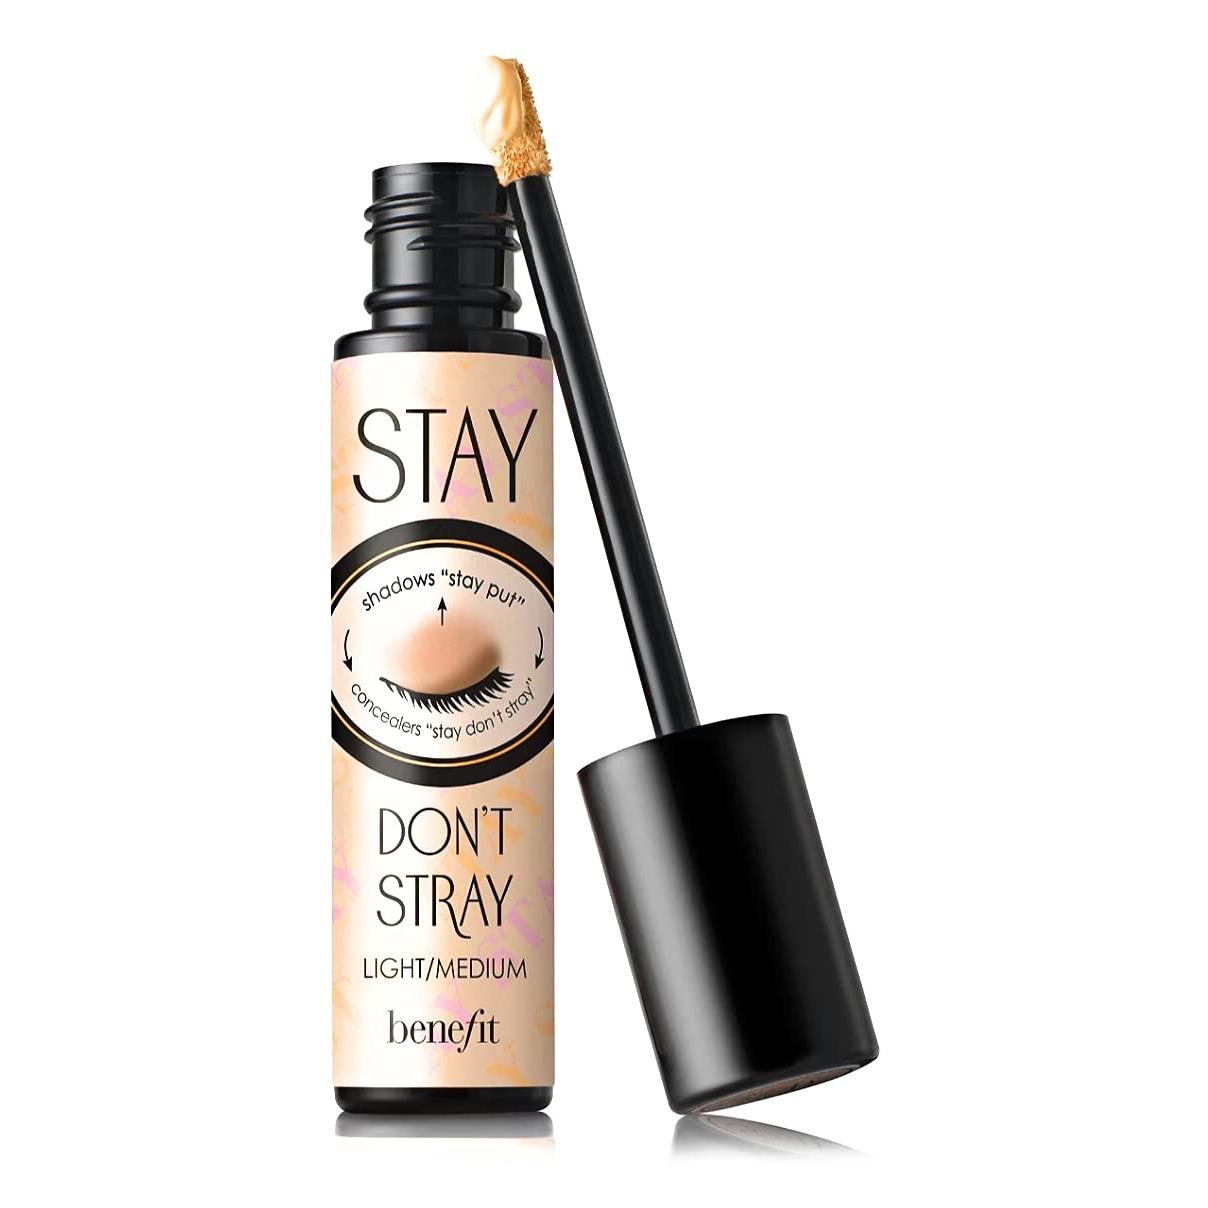 Benefit Cosmetics Stay Don't Stray Stay-Put Primer for Concealers & Eye Shadows, light/medium